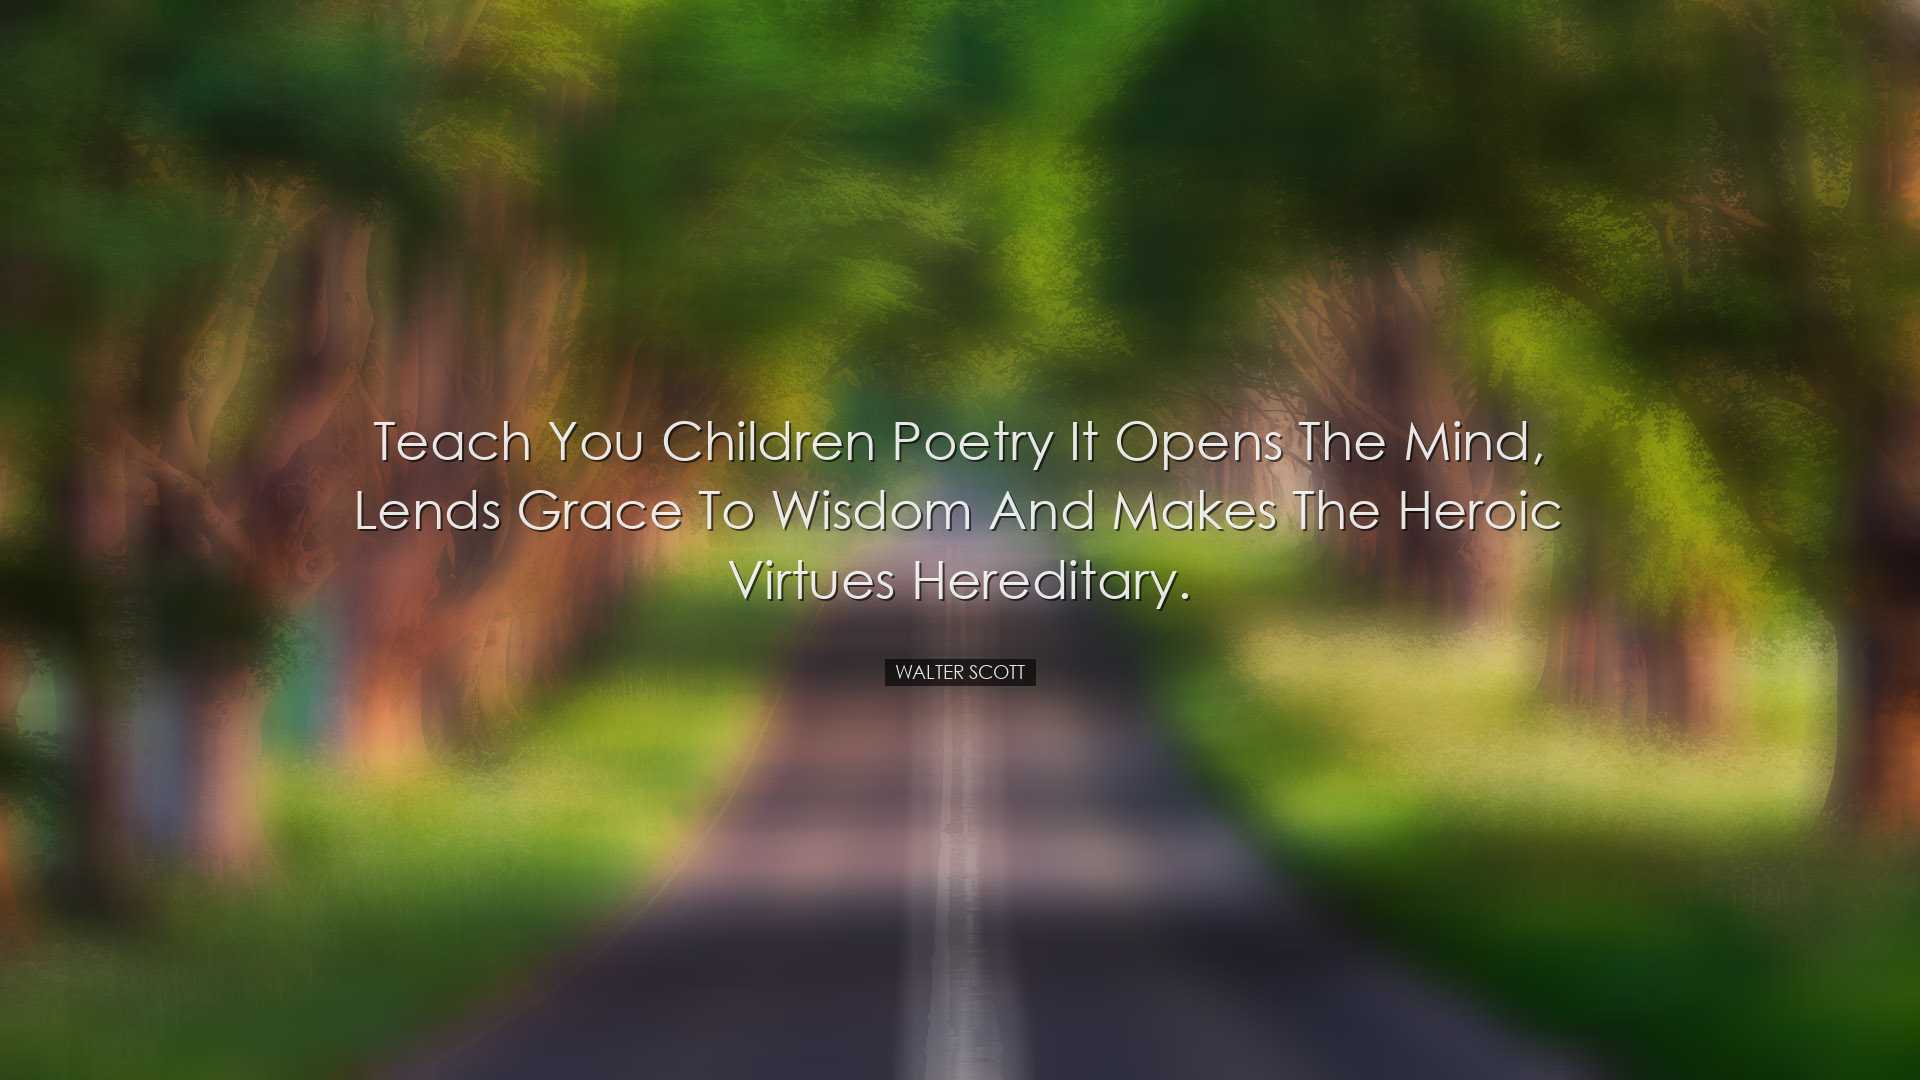 Teach you children poetry it opens the mind, lends grace to wisdom